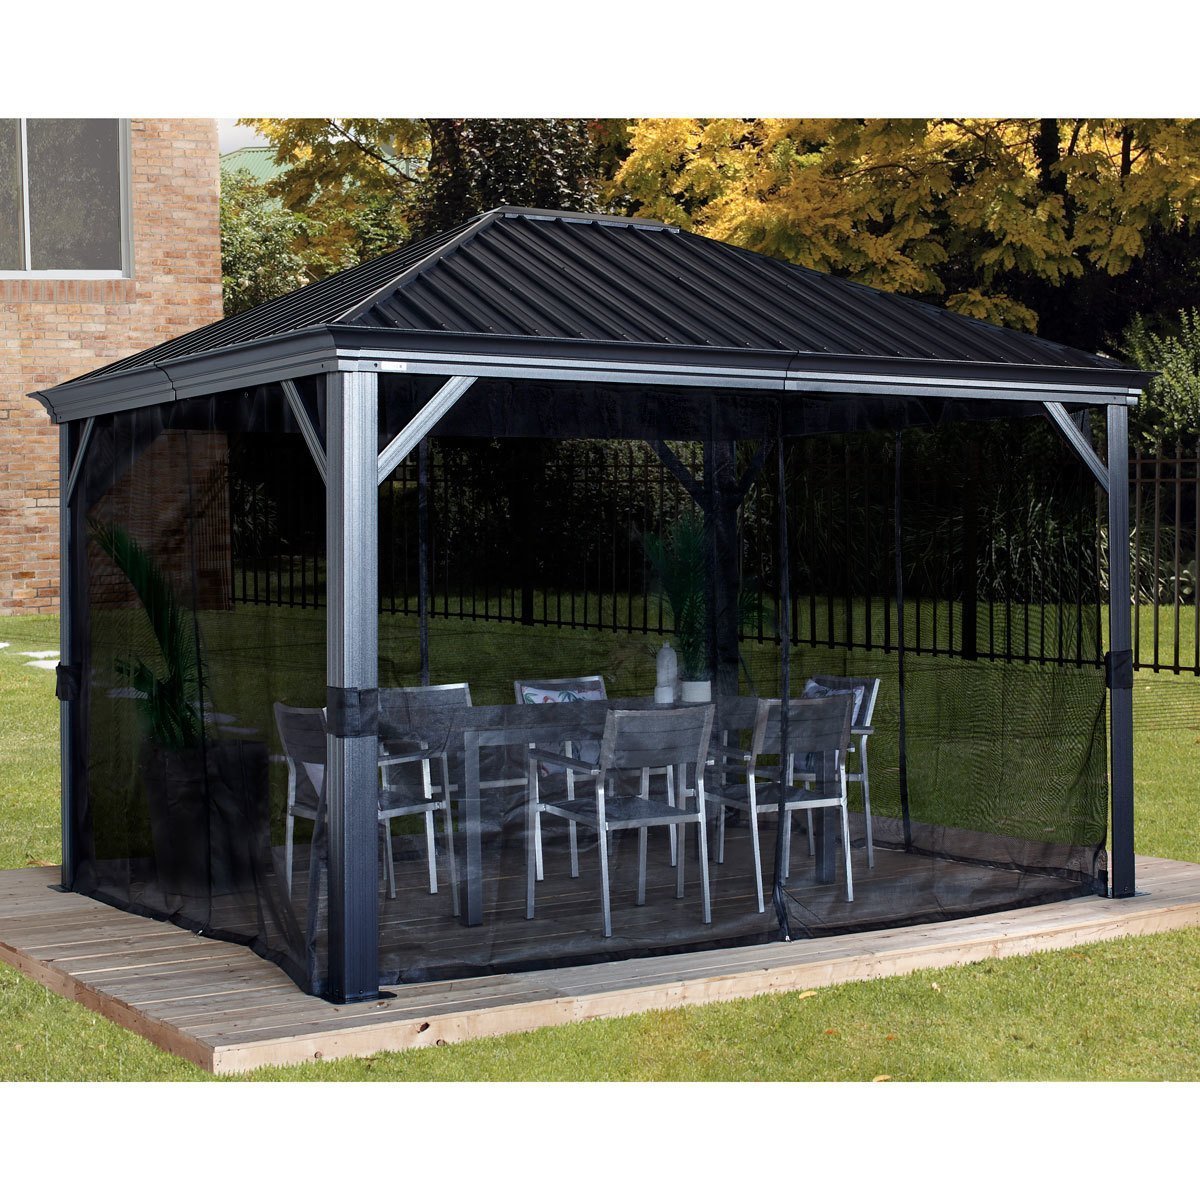 Sojag Marsala 10ft x 12ft (2.98 x 3.63m) Sun Shelter with Galvanised Steel Roof + Insect Netting - Signature Retail Stores